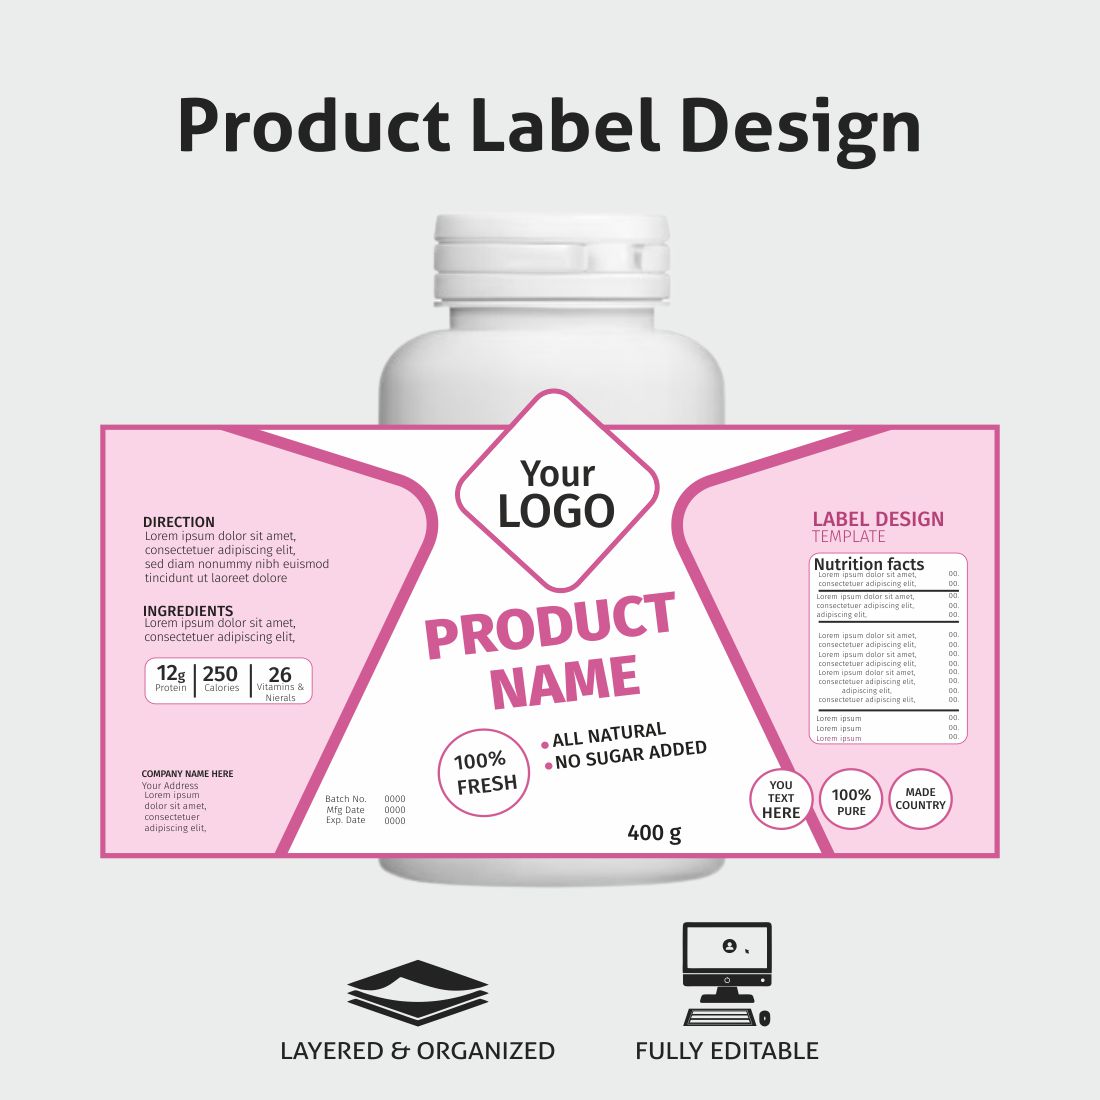 Product Label Design cover image.